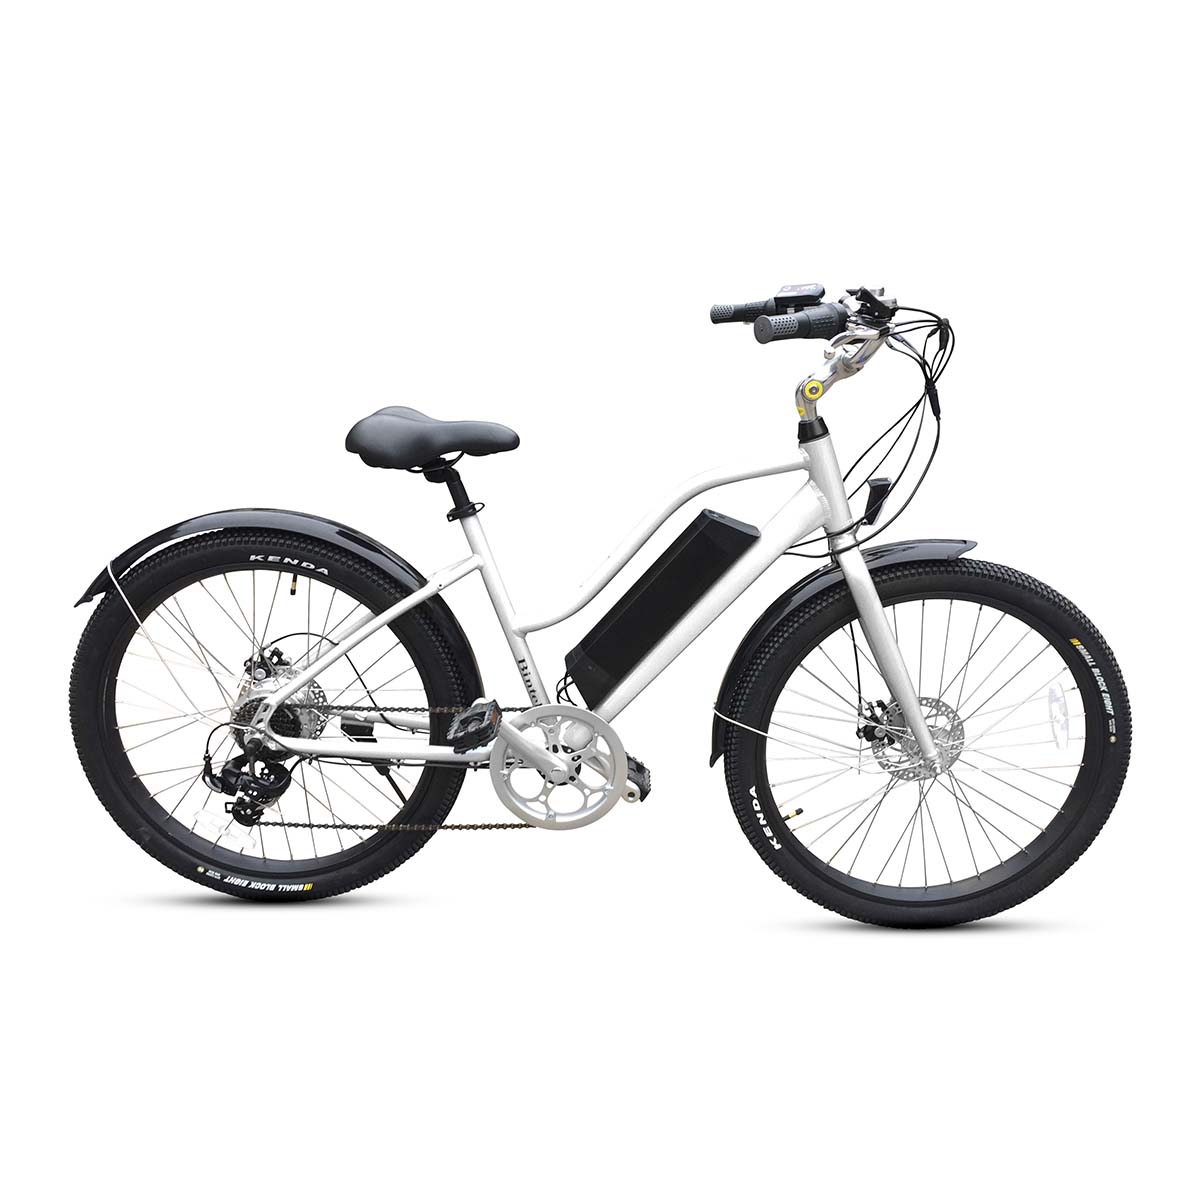 The white colour bintelli B1 electric cruiser bike with 350w and 20mph speed